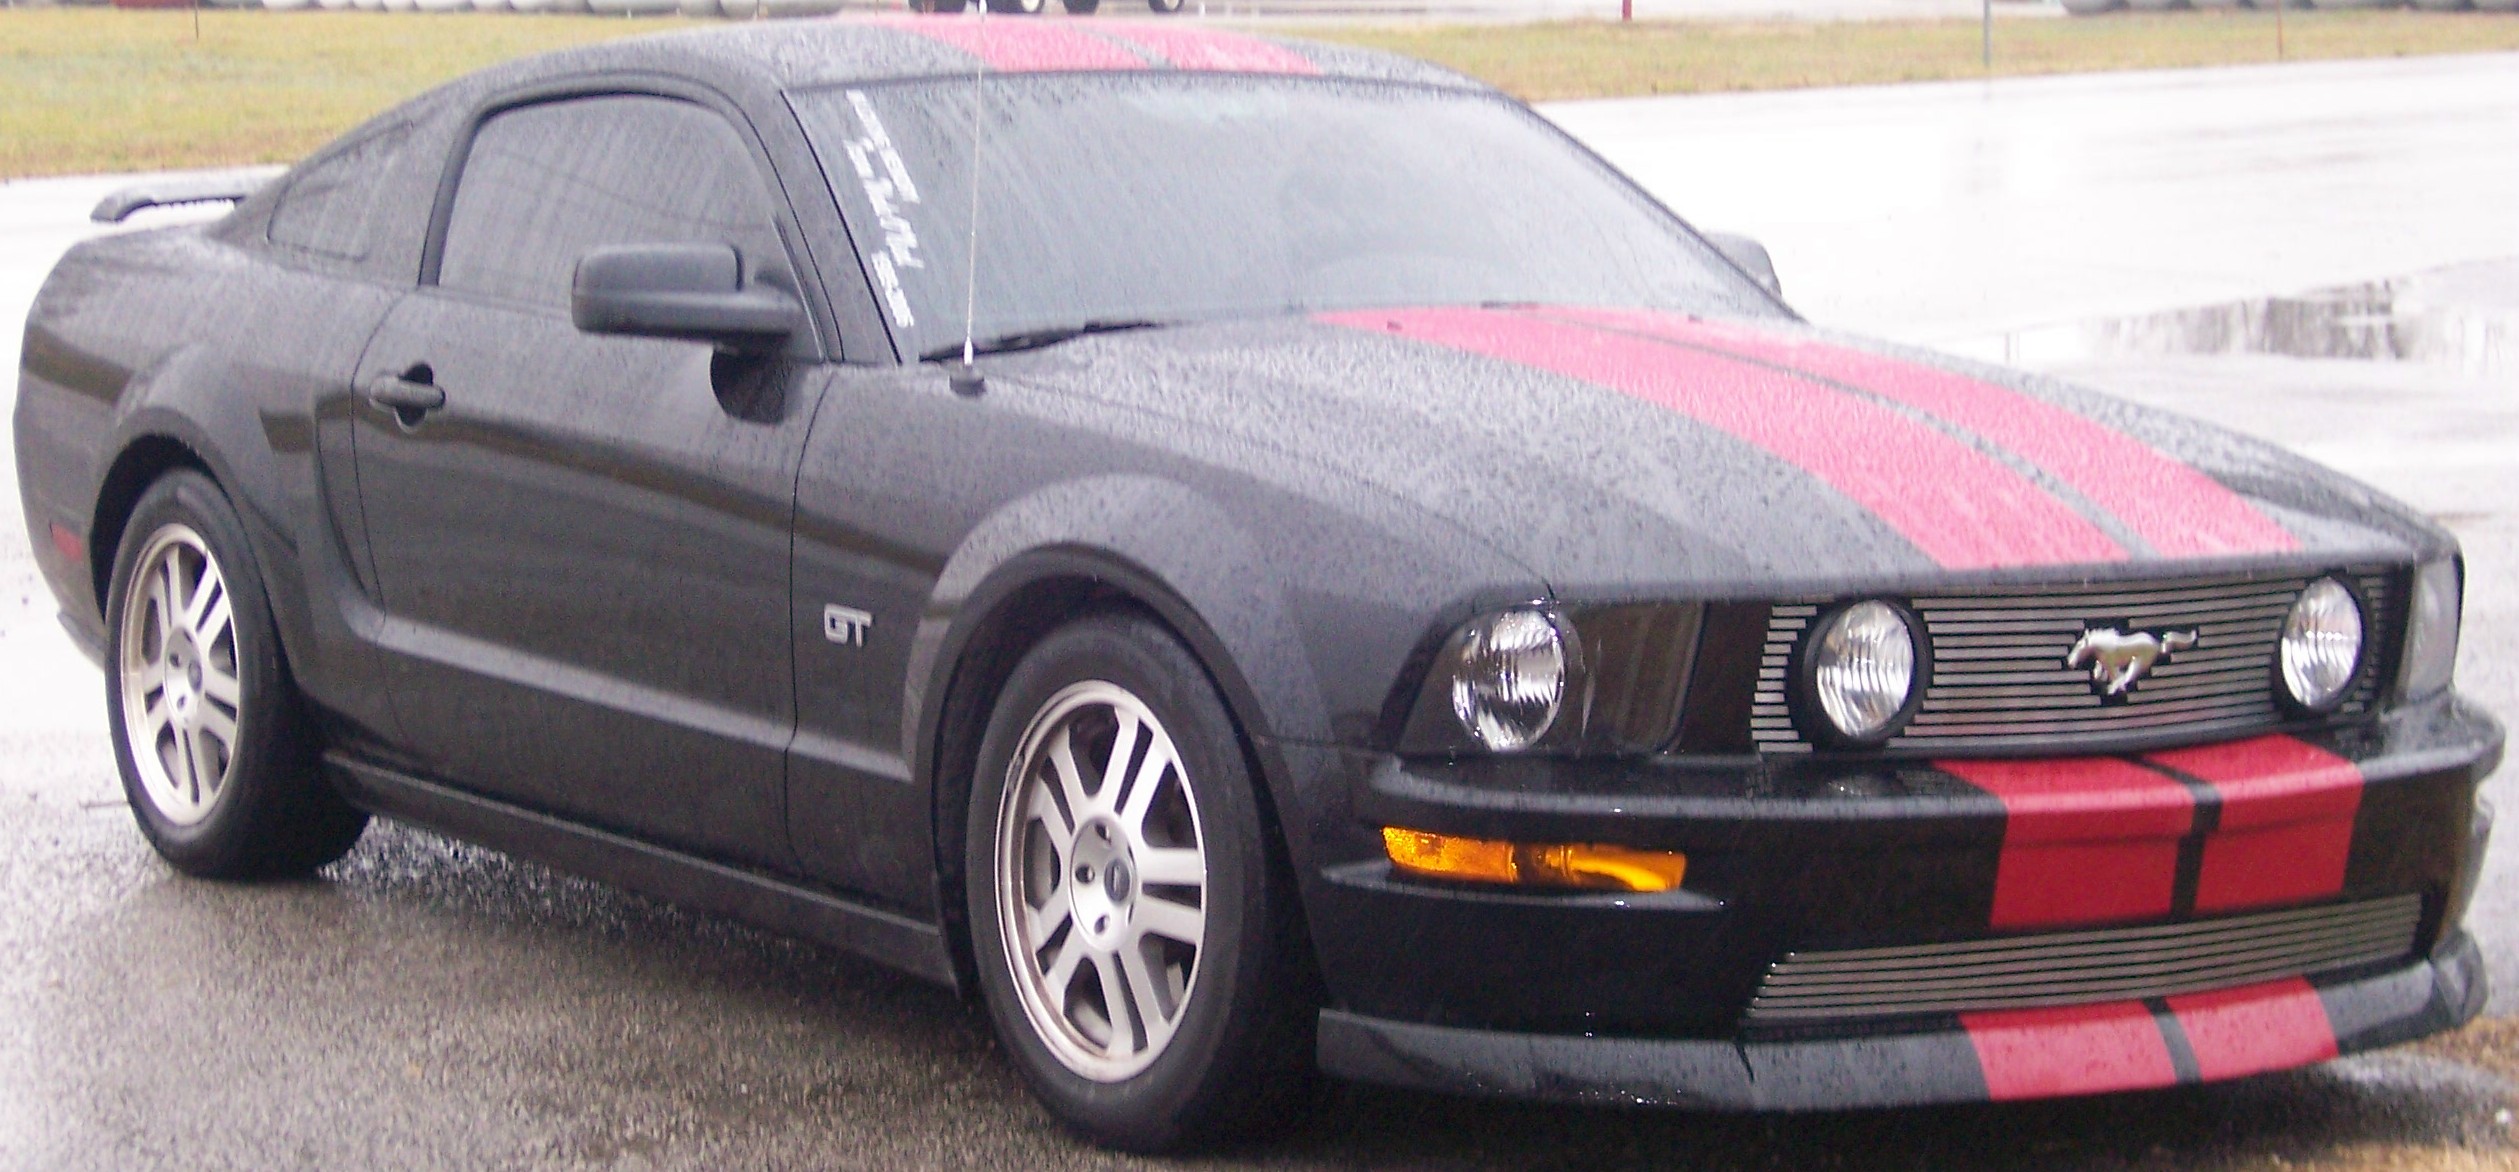 2005 Ford mustang gt msrp #8